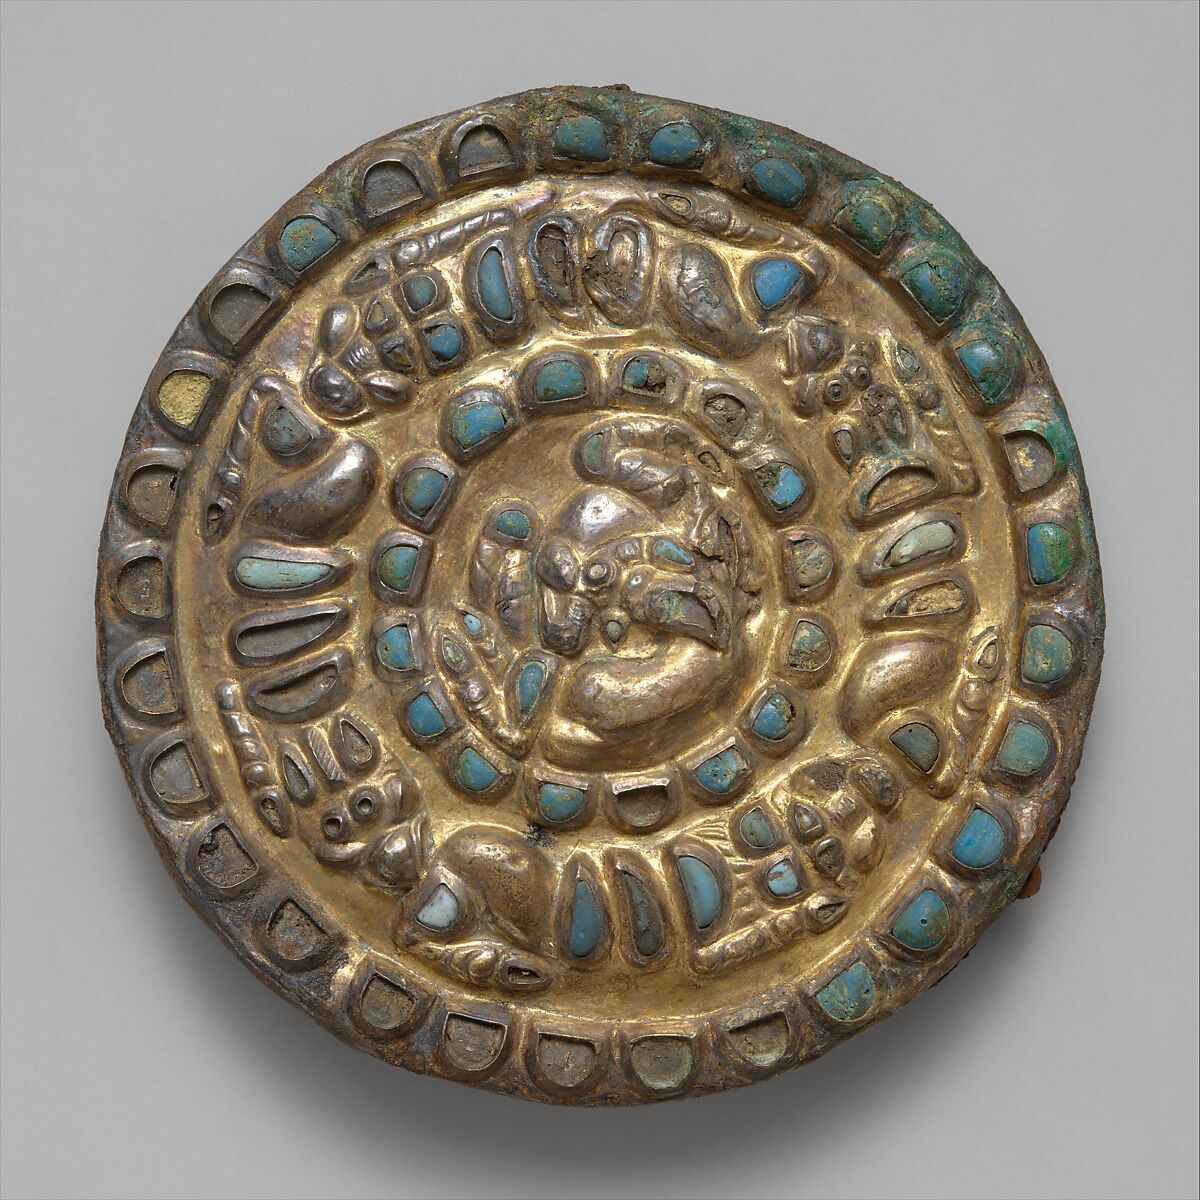 Roundel with a horned animal, lions, and griffins, Gold foil, silver, iron, semi-precious stone or paste, Sarmatian